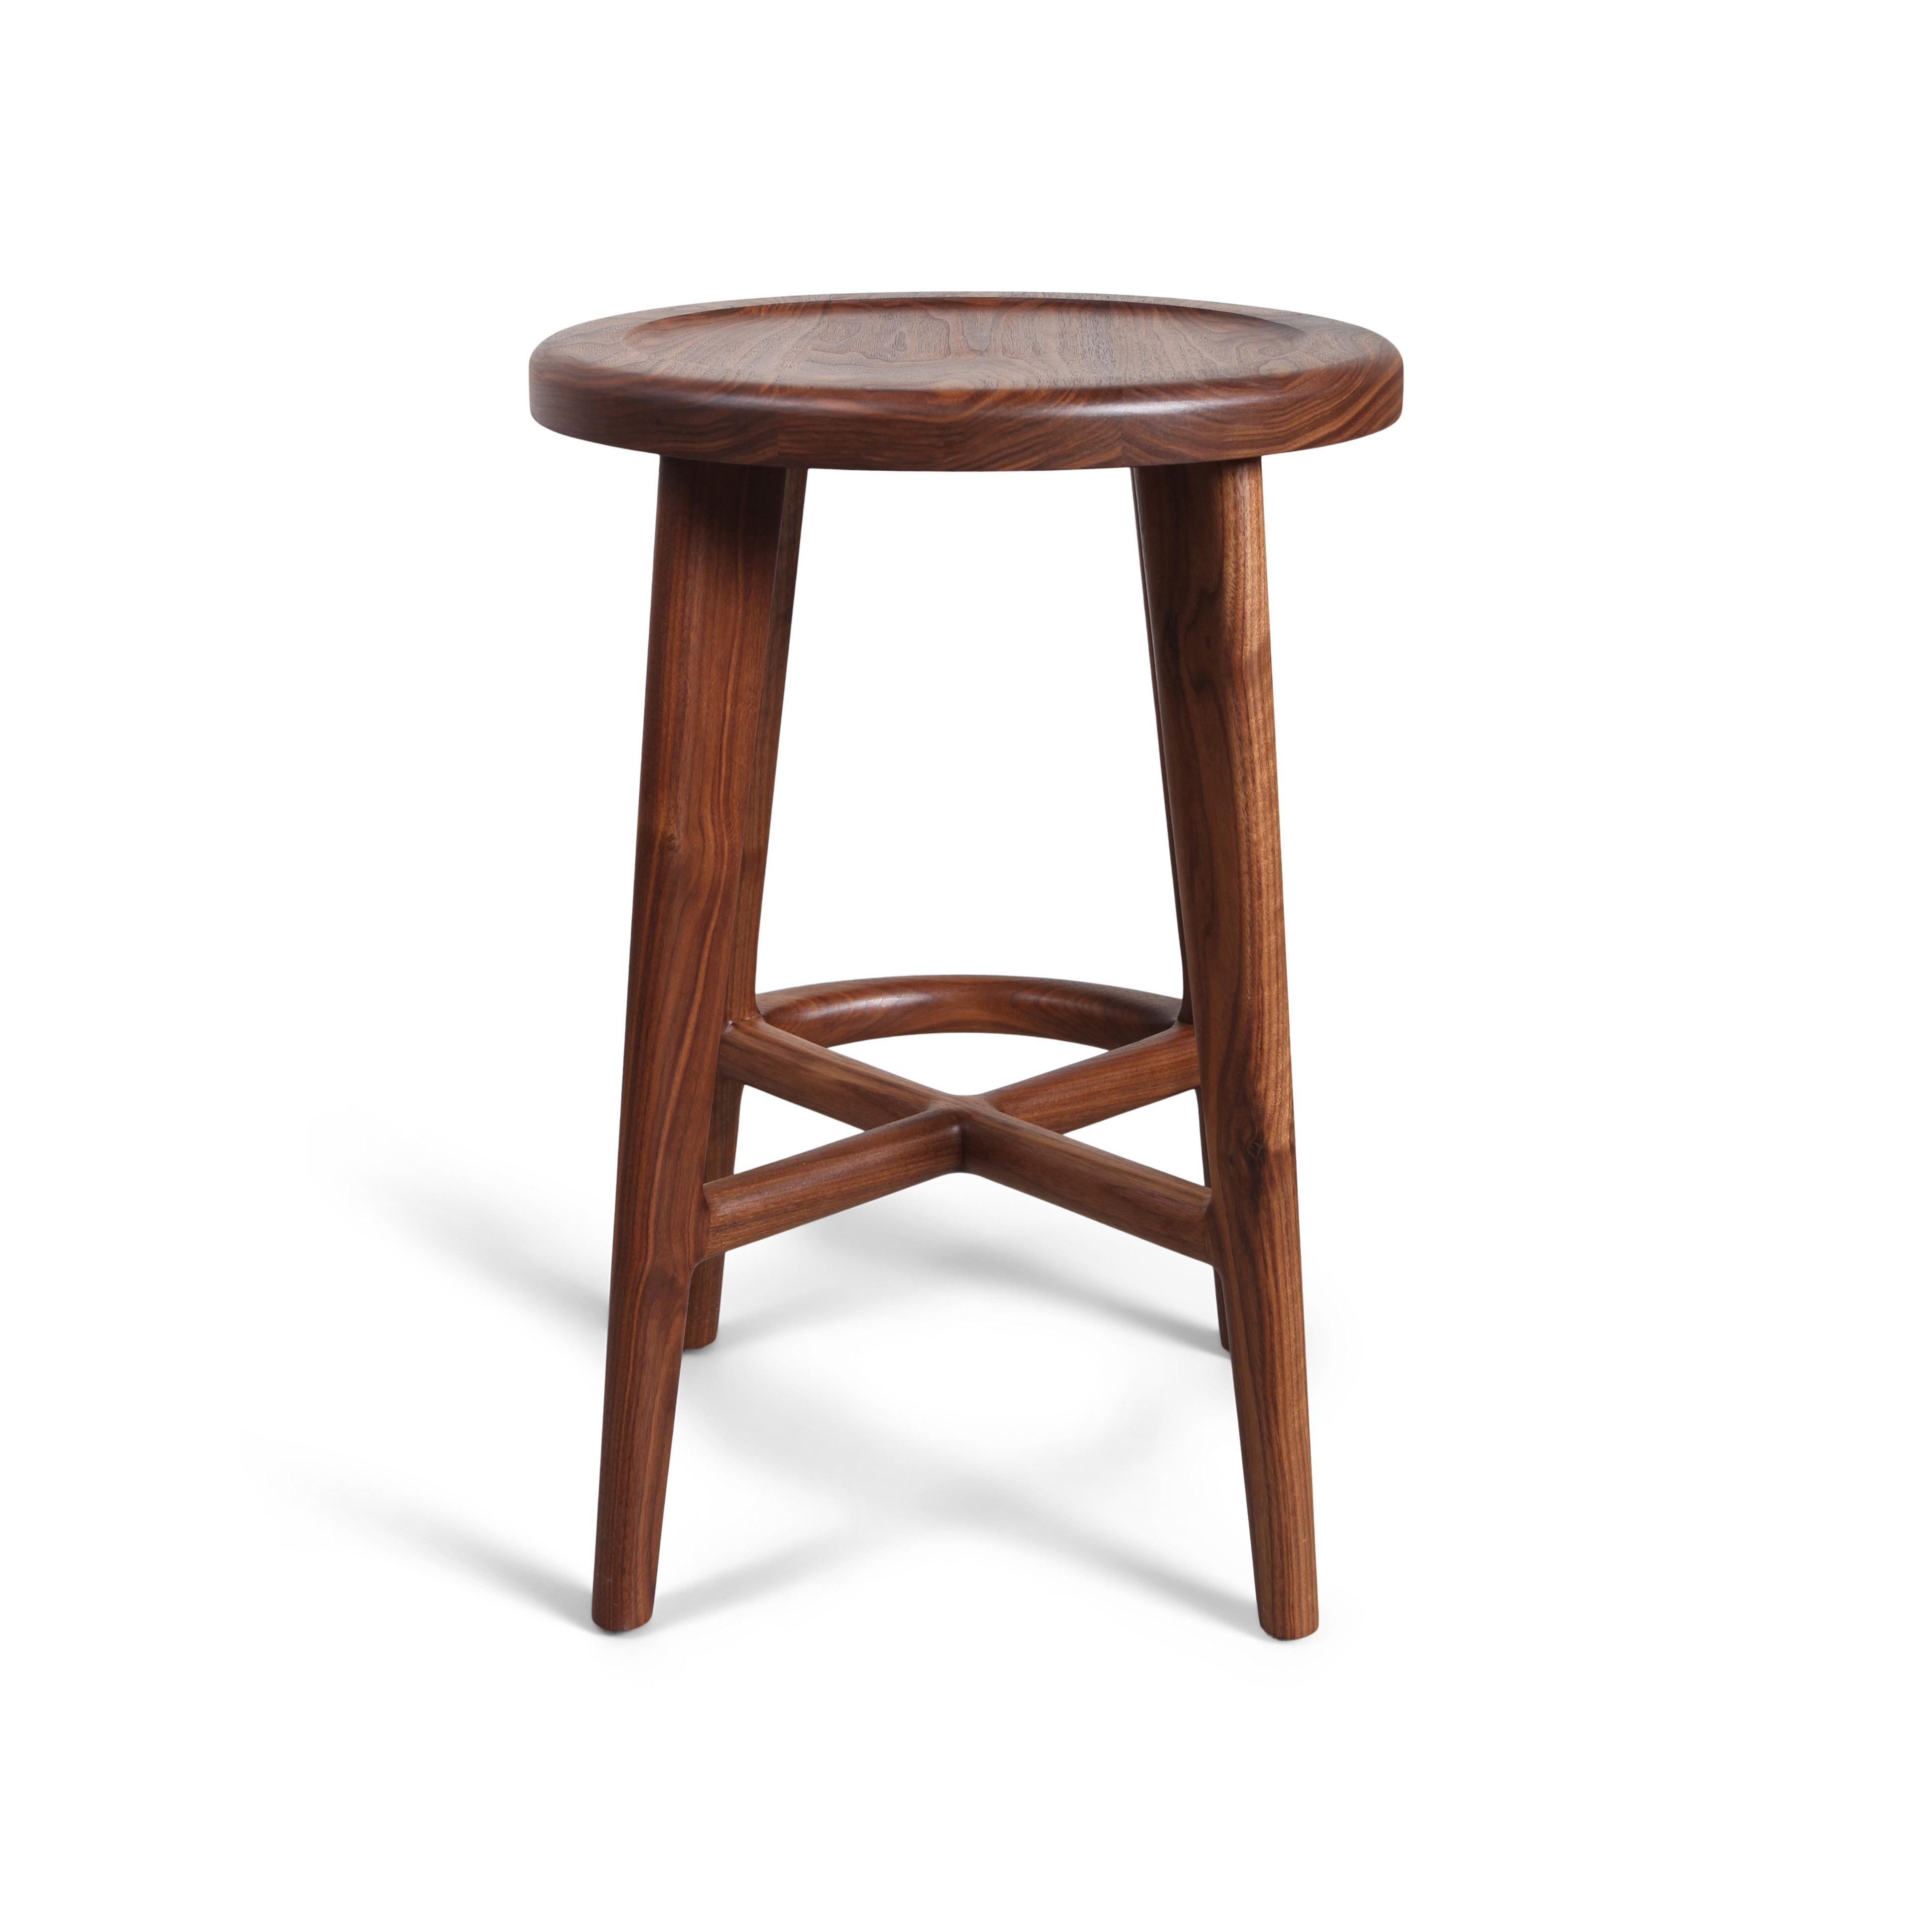 Turned Handcrafted Solid Wood Bar or Counter Stools, Walnut - (Set of 2) Ready to Ship For Sale